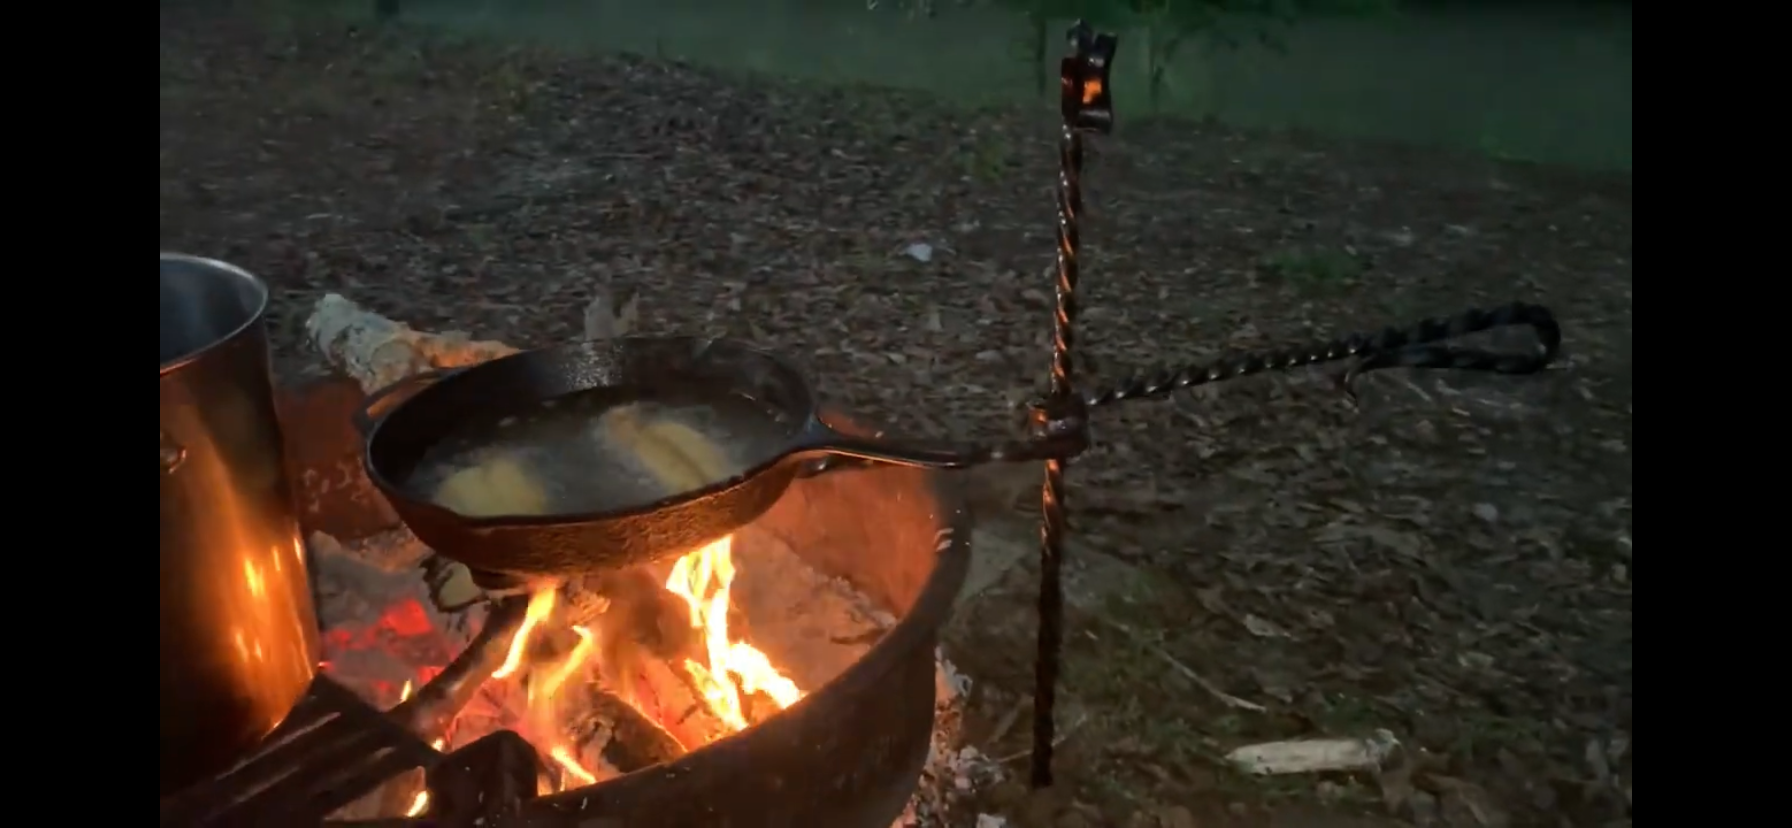 Scout Camp Cooking Irons (Twisted)